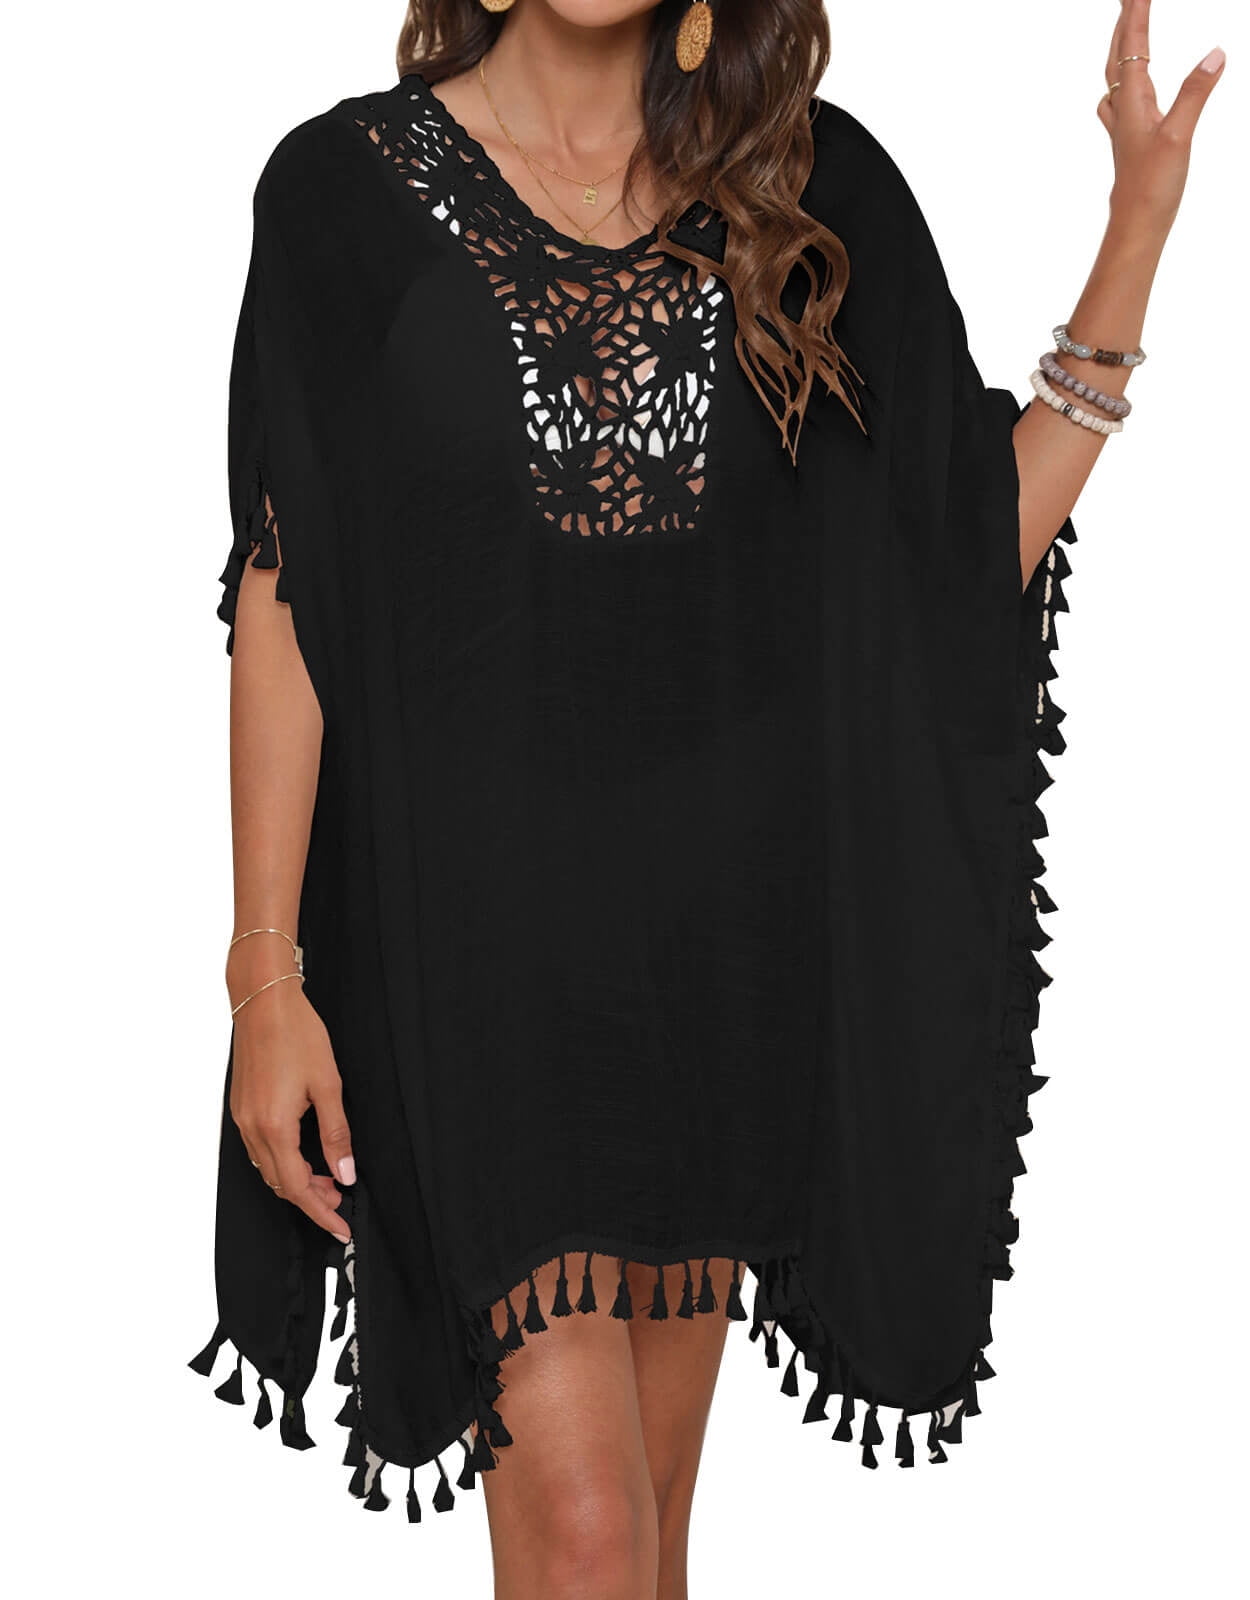 Swimsuit Cover Up for Women Plus Size Bathing Suit Cover Ups Casual ...